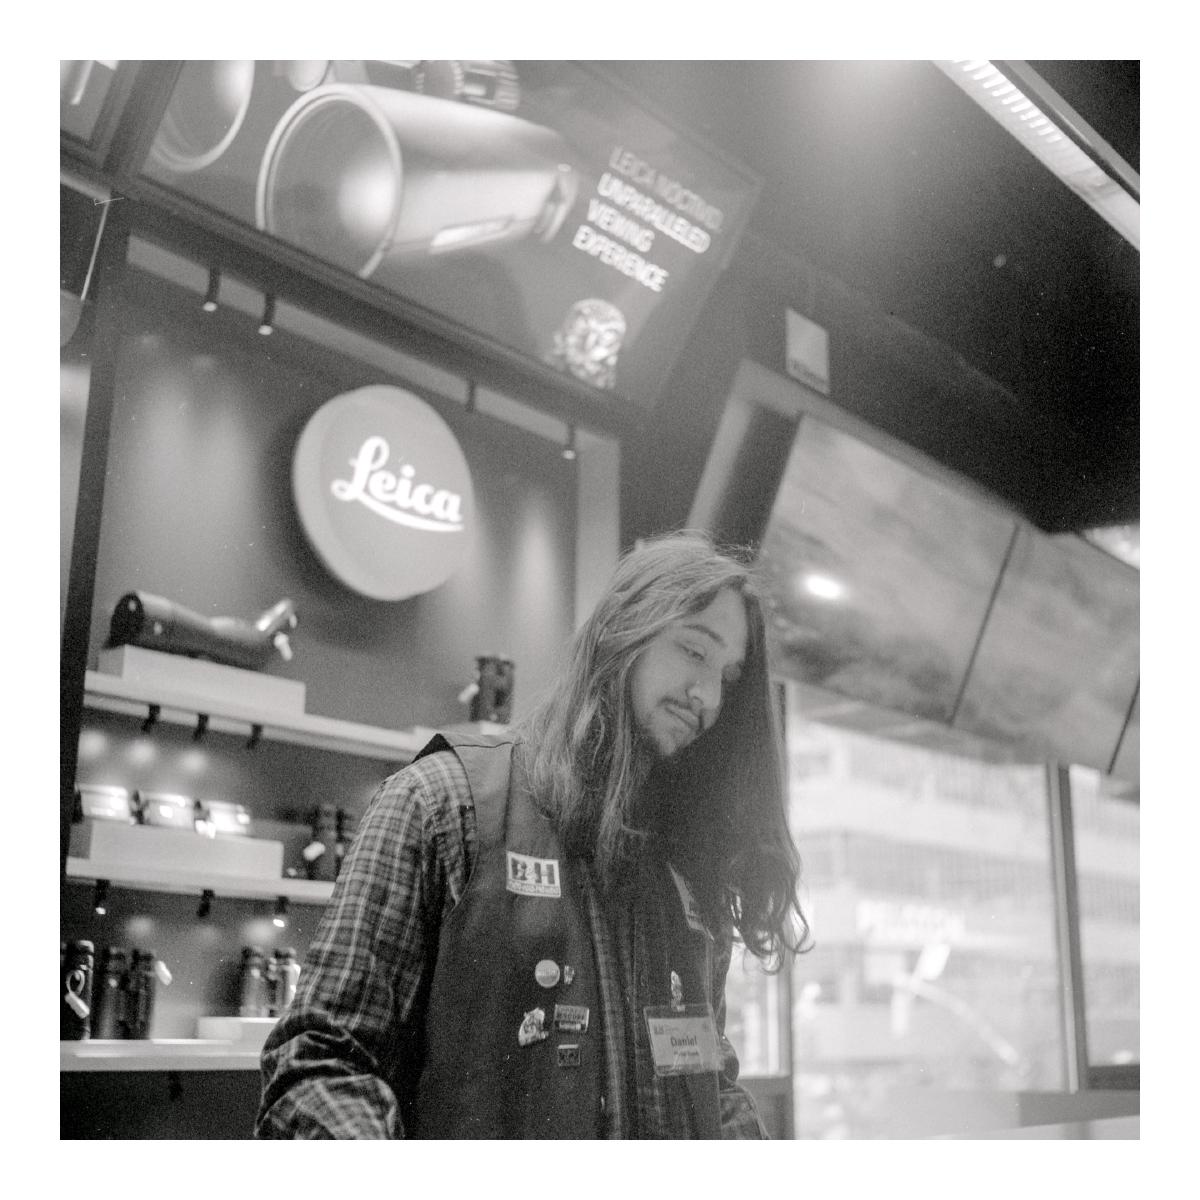 A person with long hair is looking down with a pleasant expression and standing at a counter. Behind the counter some binoculars and scopes are visible under a 'Leica' logo.